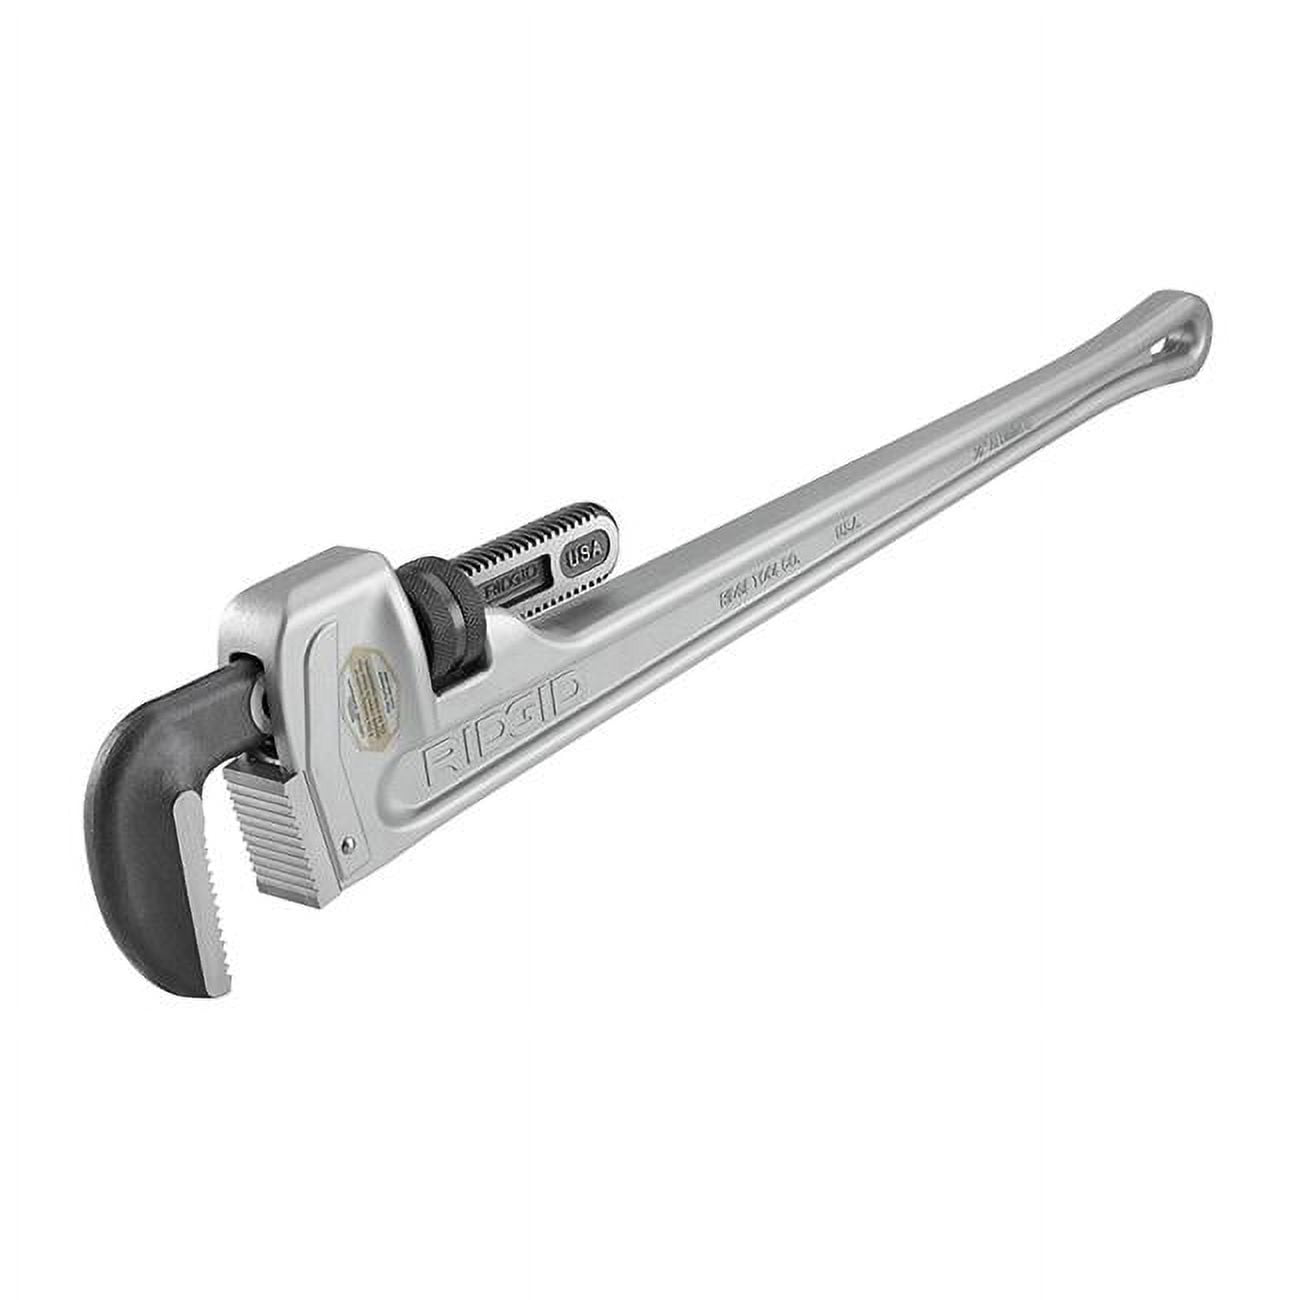 31110 Aluminum Straight Pipe Wrench, Plumbing Wrench - 36 In.